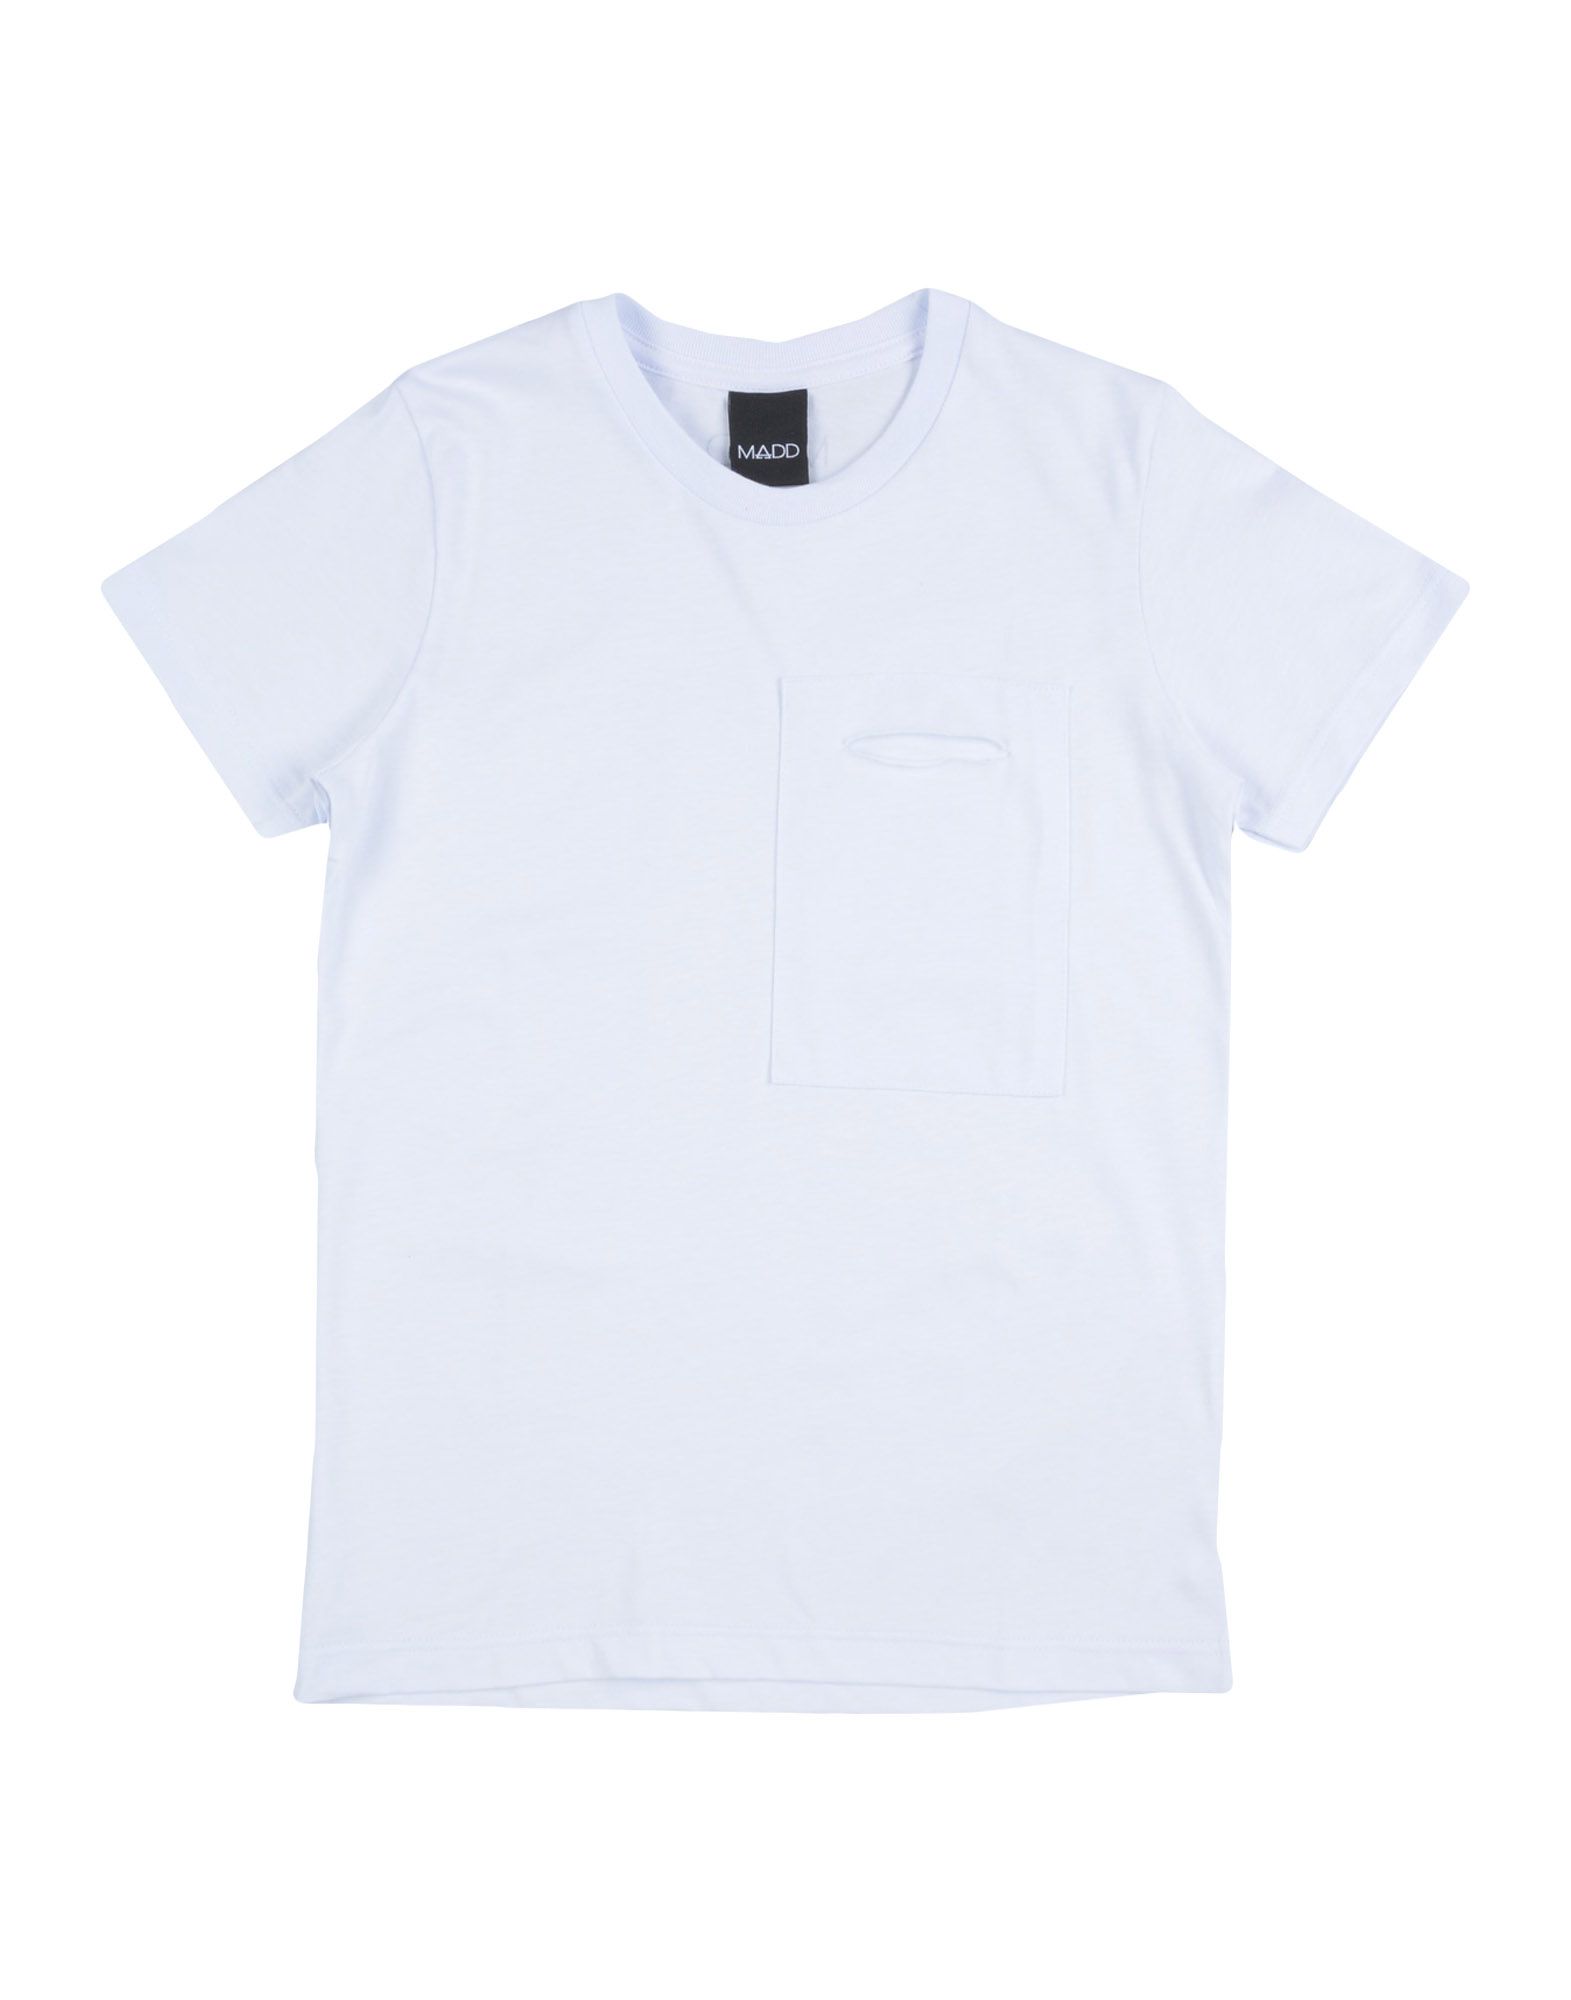 Madd Kids' T-shirts In White